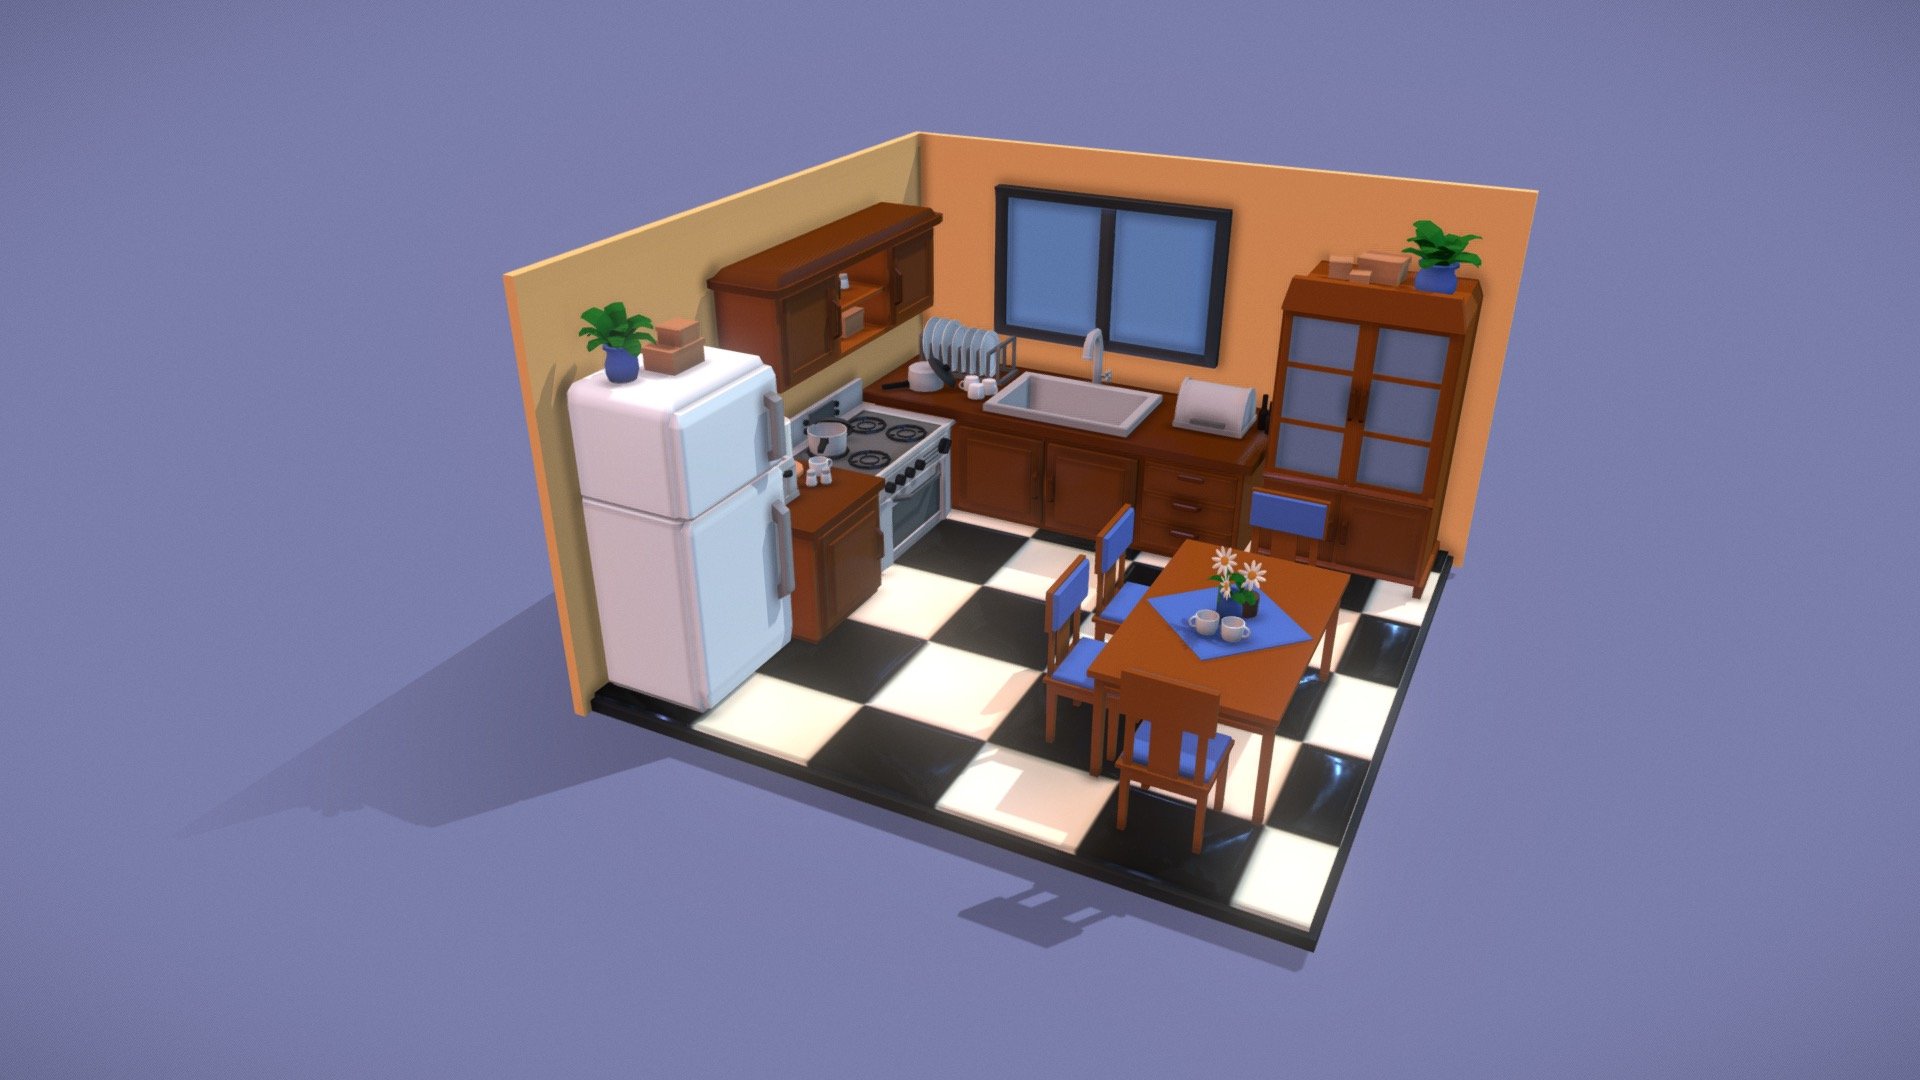 A little isometric kitchen I modelled for a class assignment using Maya. =) - ISOMETRIC KITCHEN - 3D model by Jewel Lee_ (@JewelLee_) 3d model